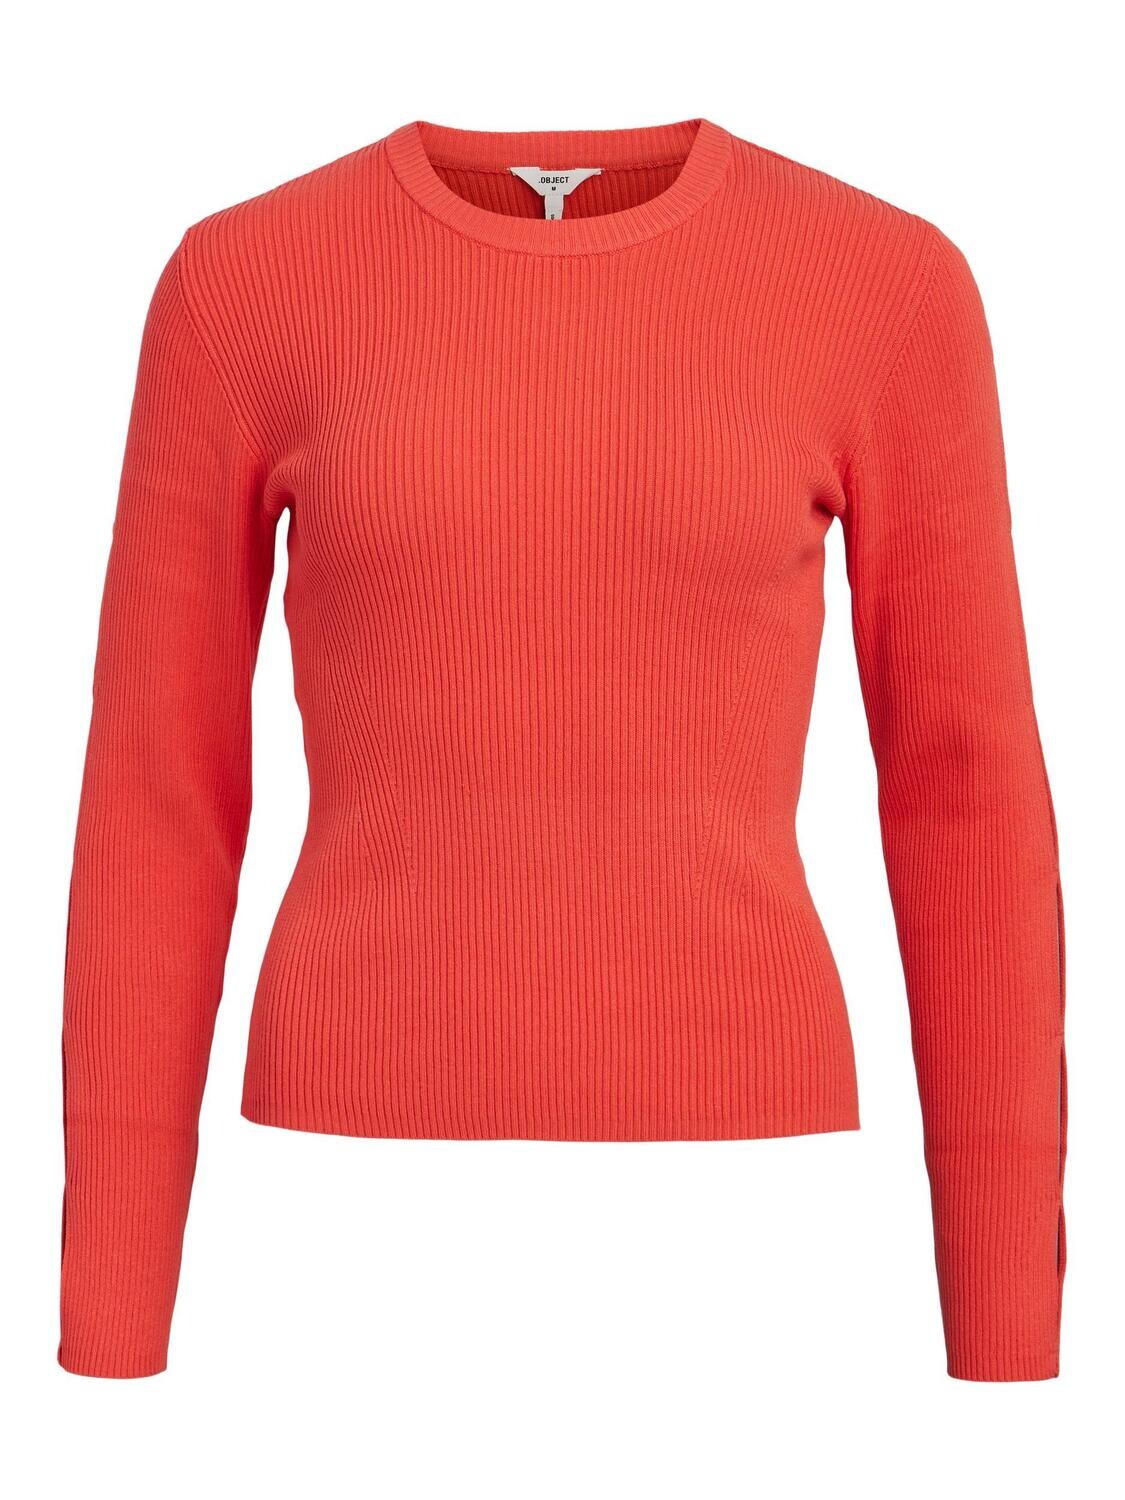 OBJLASIA L/S KNIT PULLOVER 125 Hot Coral